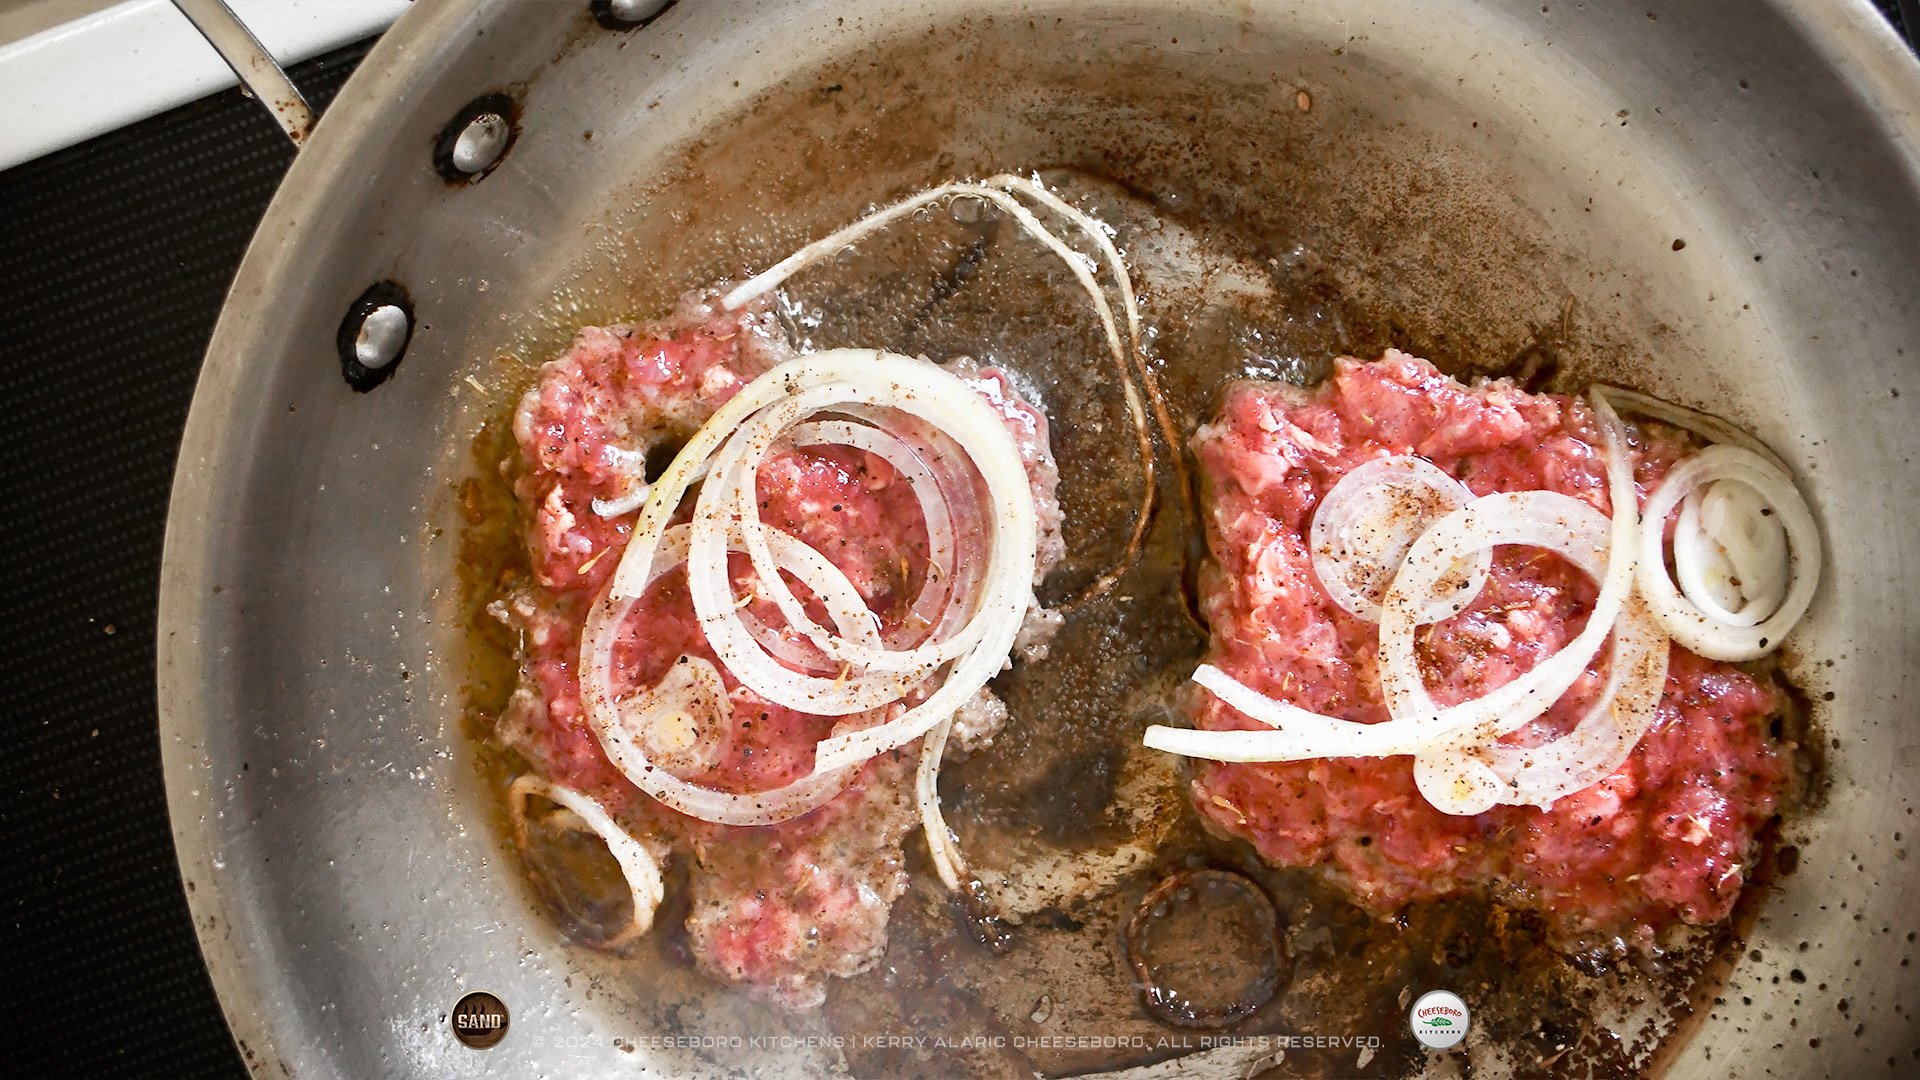 cheeskitch-240108-pop-sauce-usa-smash-burgers-in-pan-with-onions-beef-sand-1-1920-hor.jpg